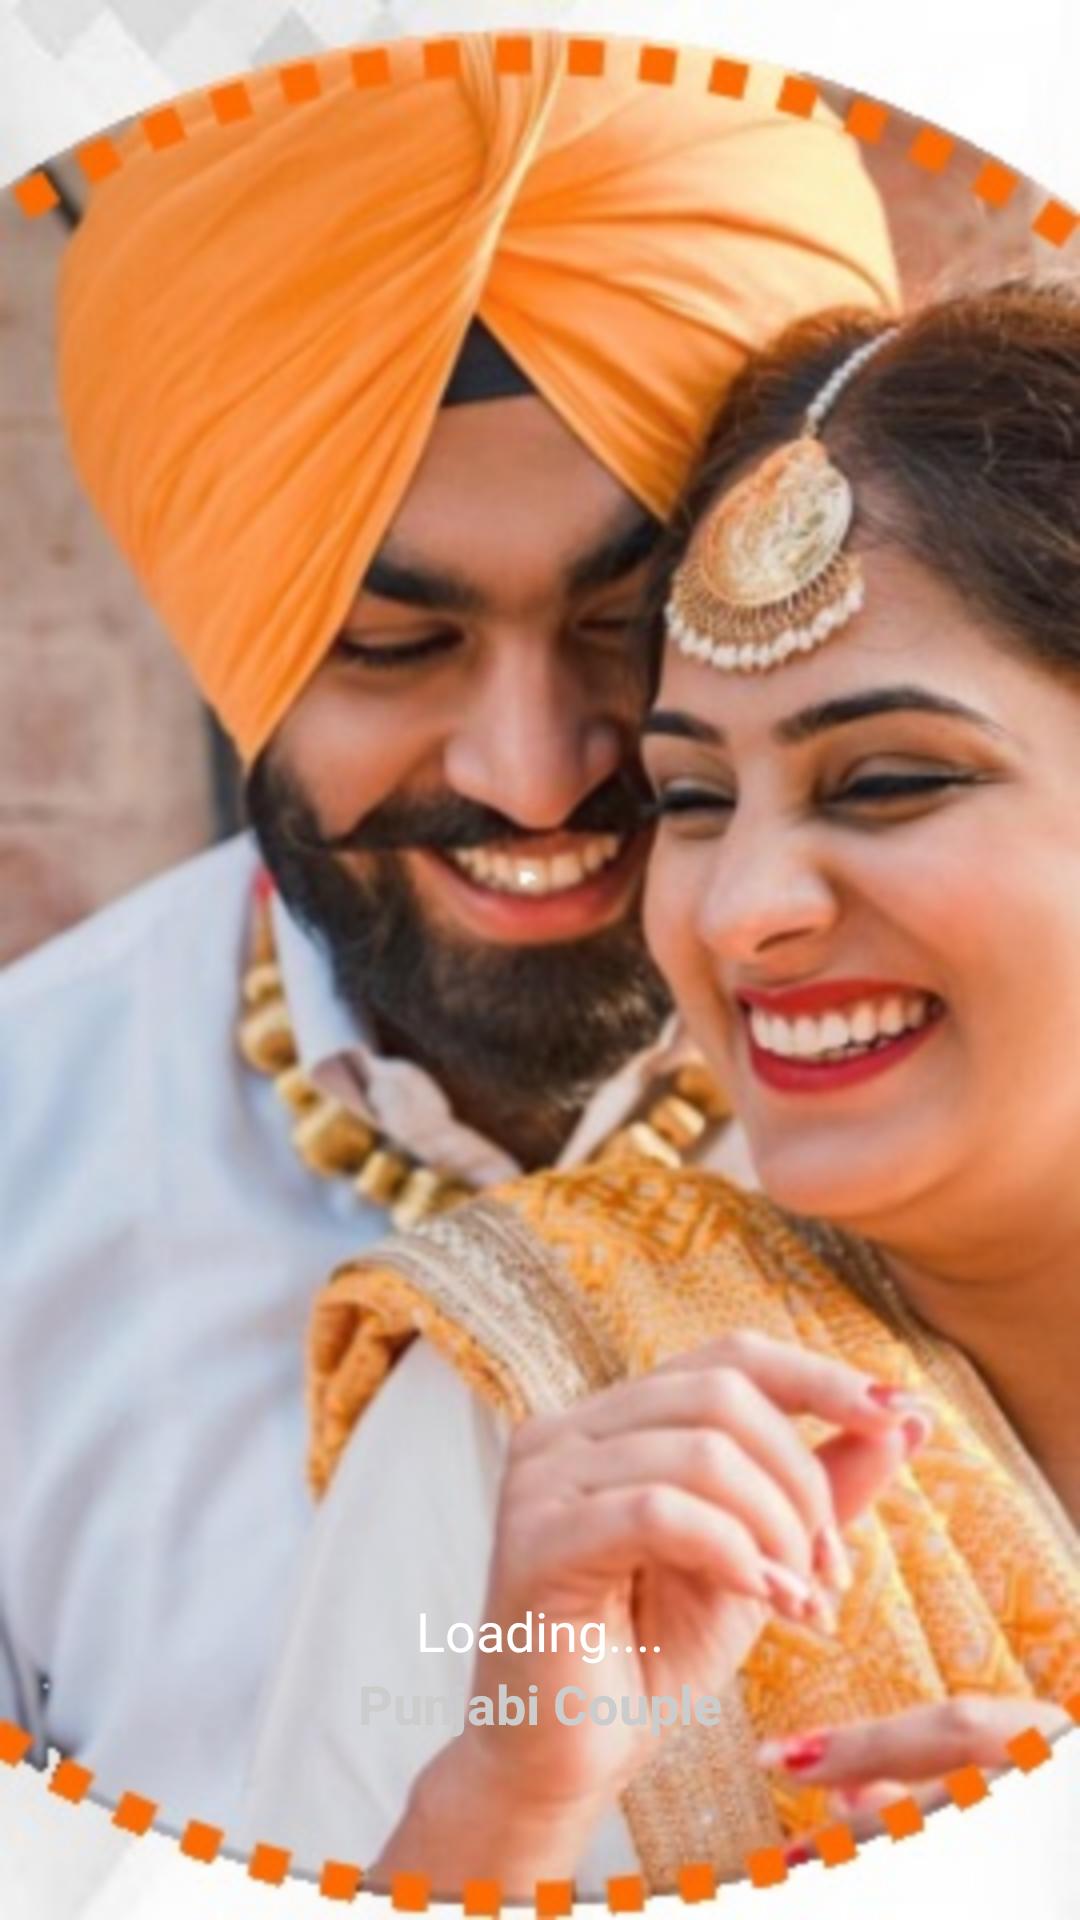 Punjabi Couple Image for Android